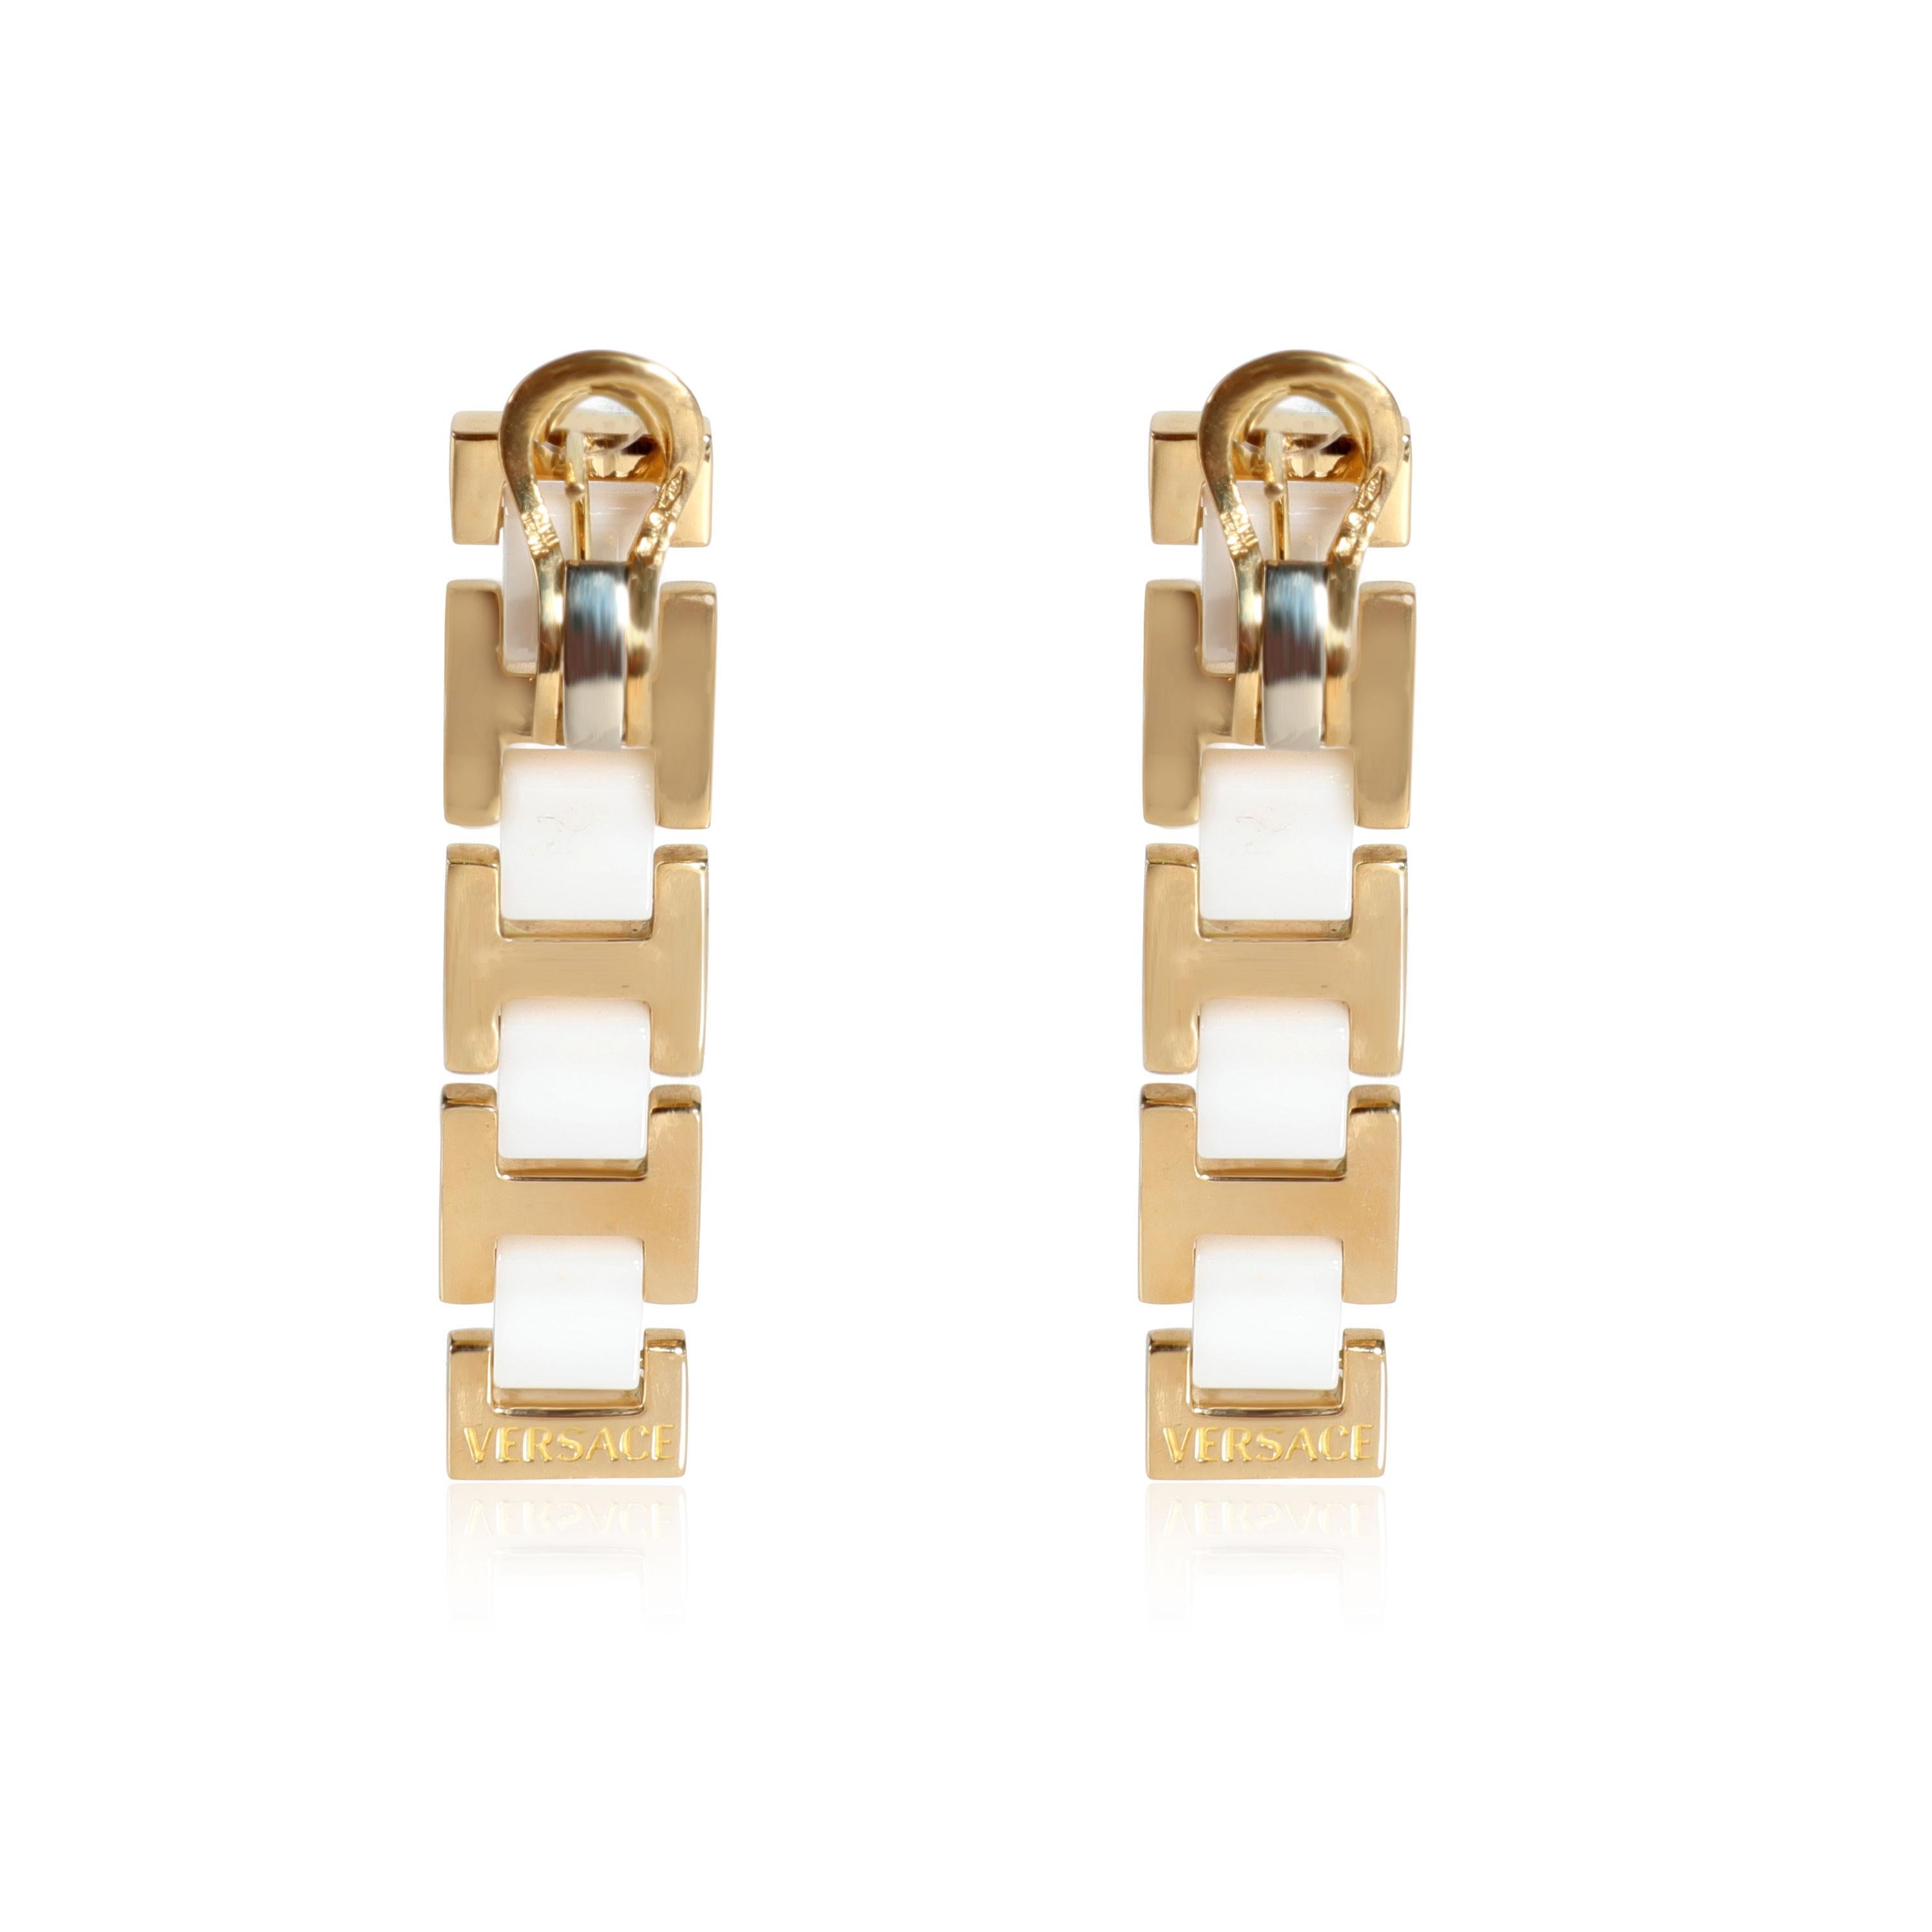 Versace White Ceramic Earring in 18K Yellow Gold

PRIMARY DETAILS
SKU: 111330
Listing Title: Versace White Ceramic Earring in 18K Yellow Gold
Condition Description: Retails for 3295 USD. In excellent condition and recently polished. Comes with Box;